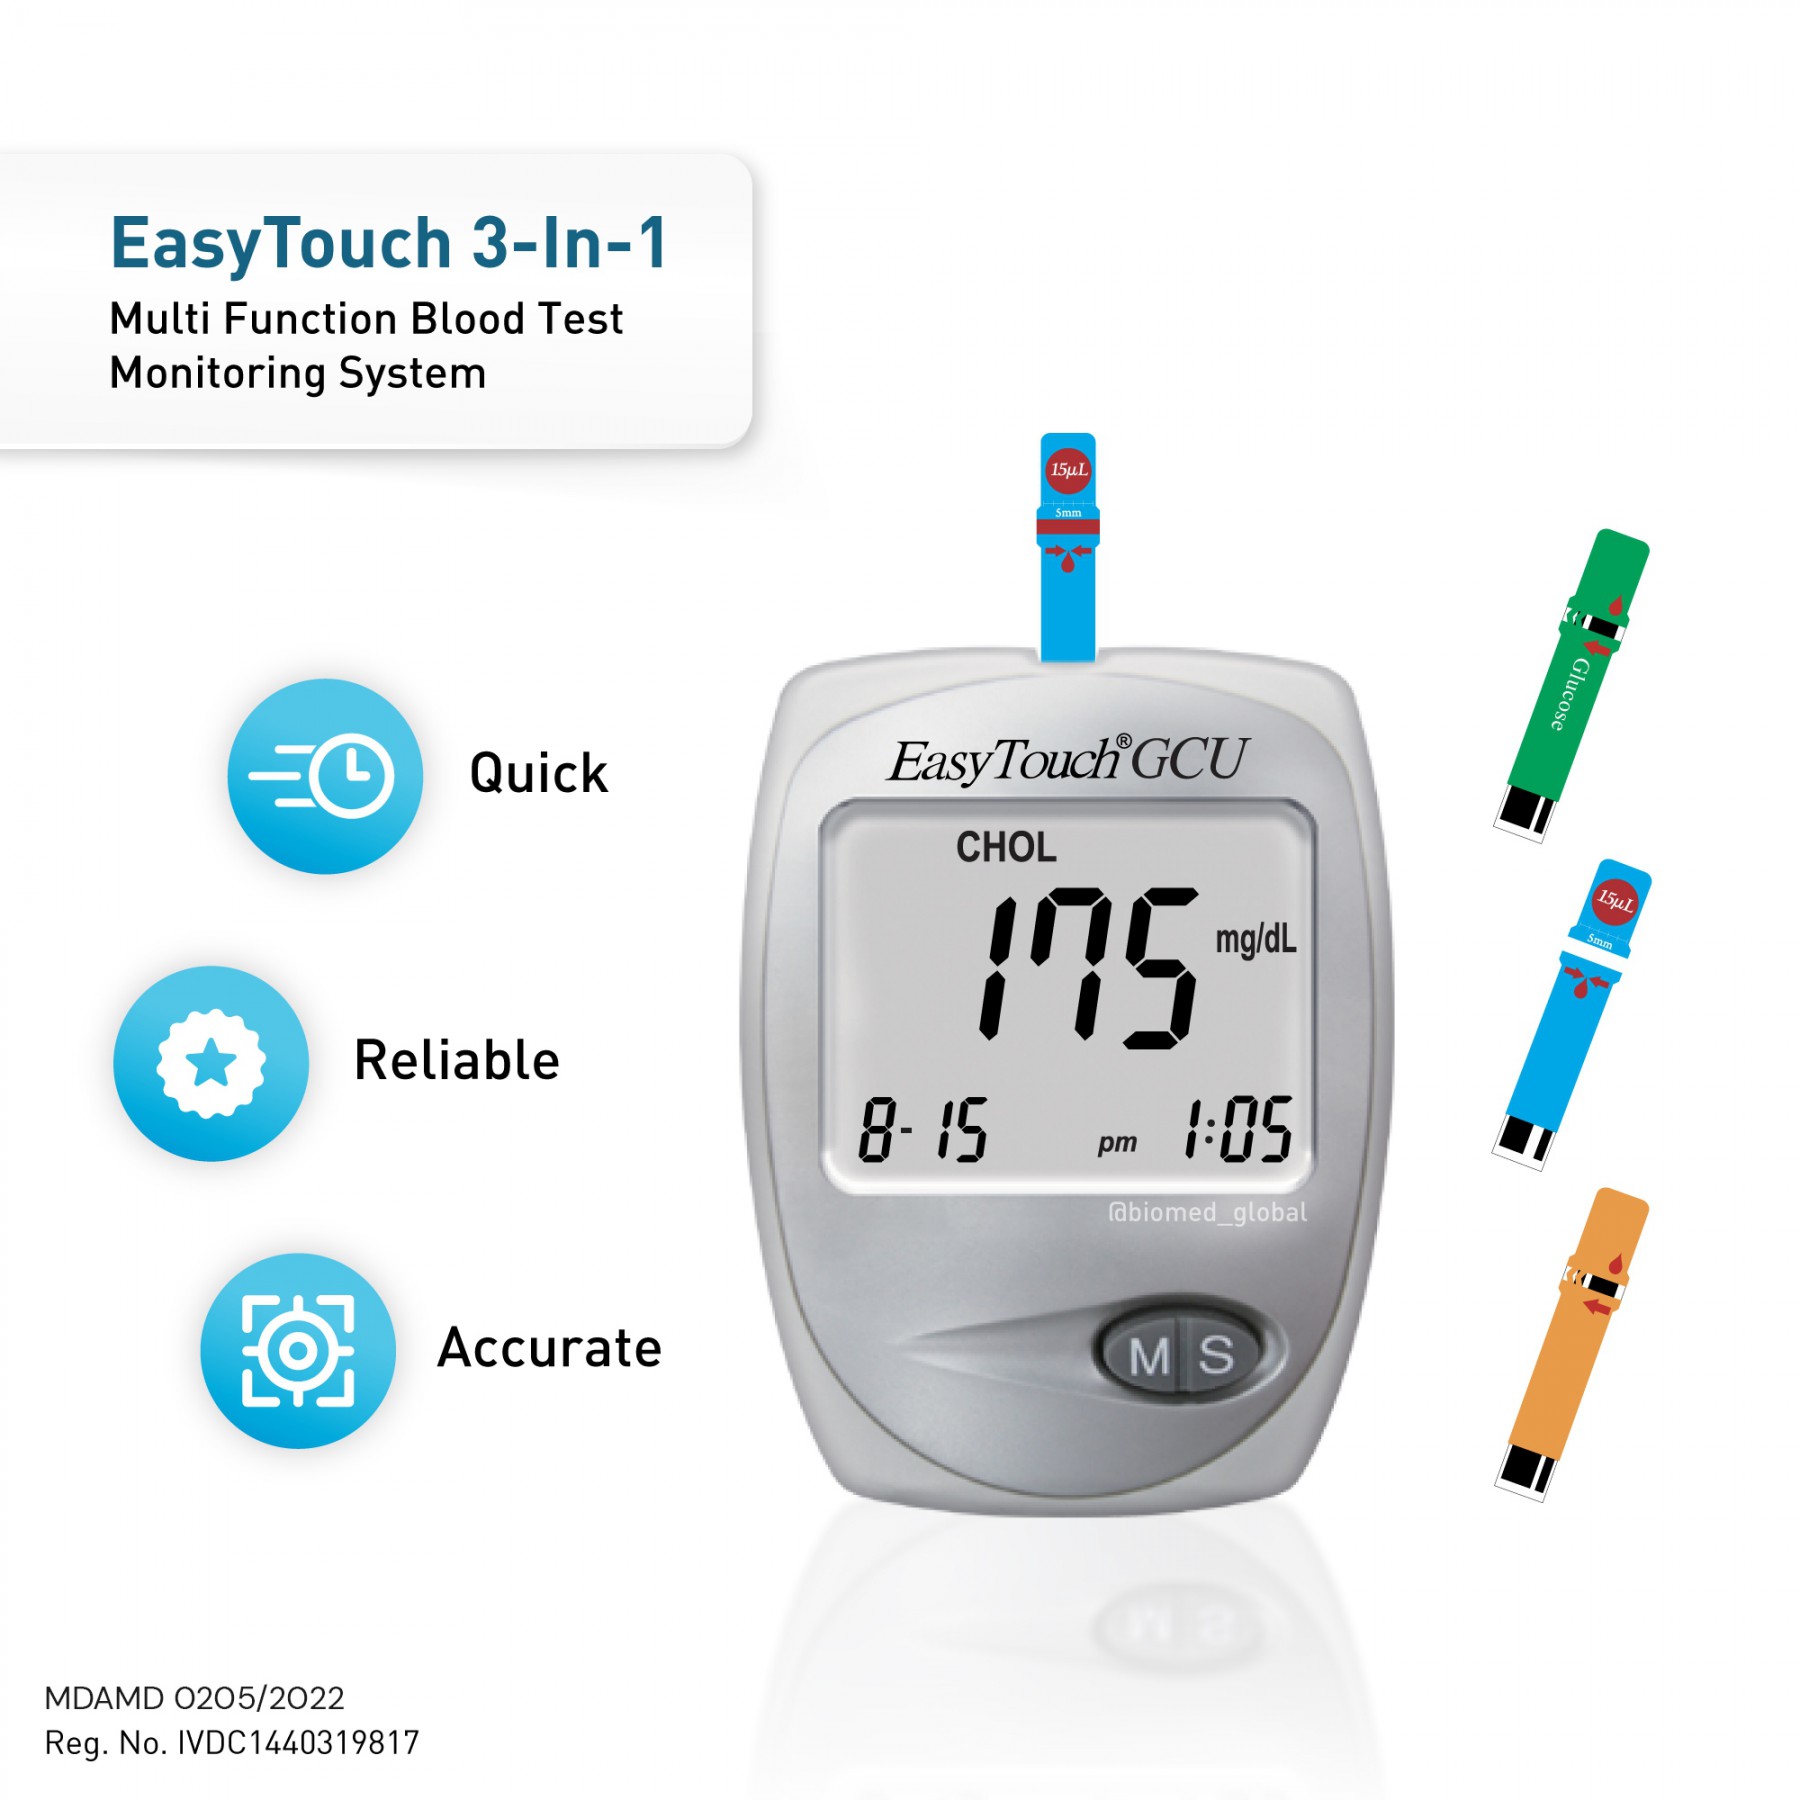 EasyTouch GCU 3-in-1 Blood Glucose, Cholesterol and Uric Acid Meter, FREE with 25 Cholesterol Test Strips (BUNDLE PACK)